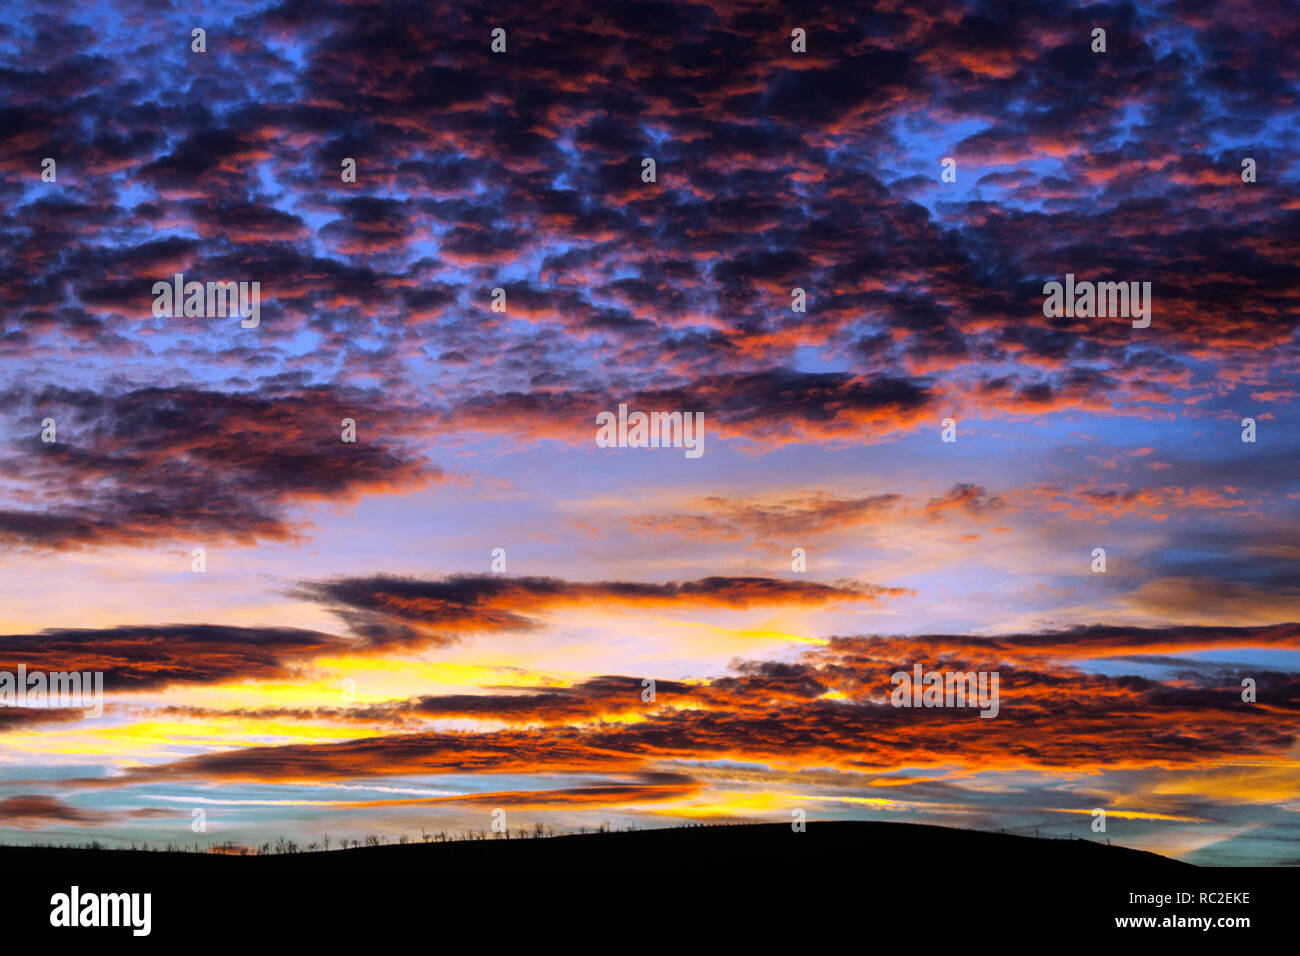 Dramatic red sunset clouds on sky Stock Photo